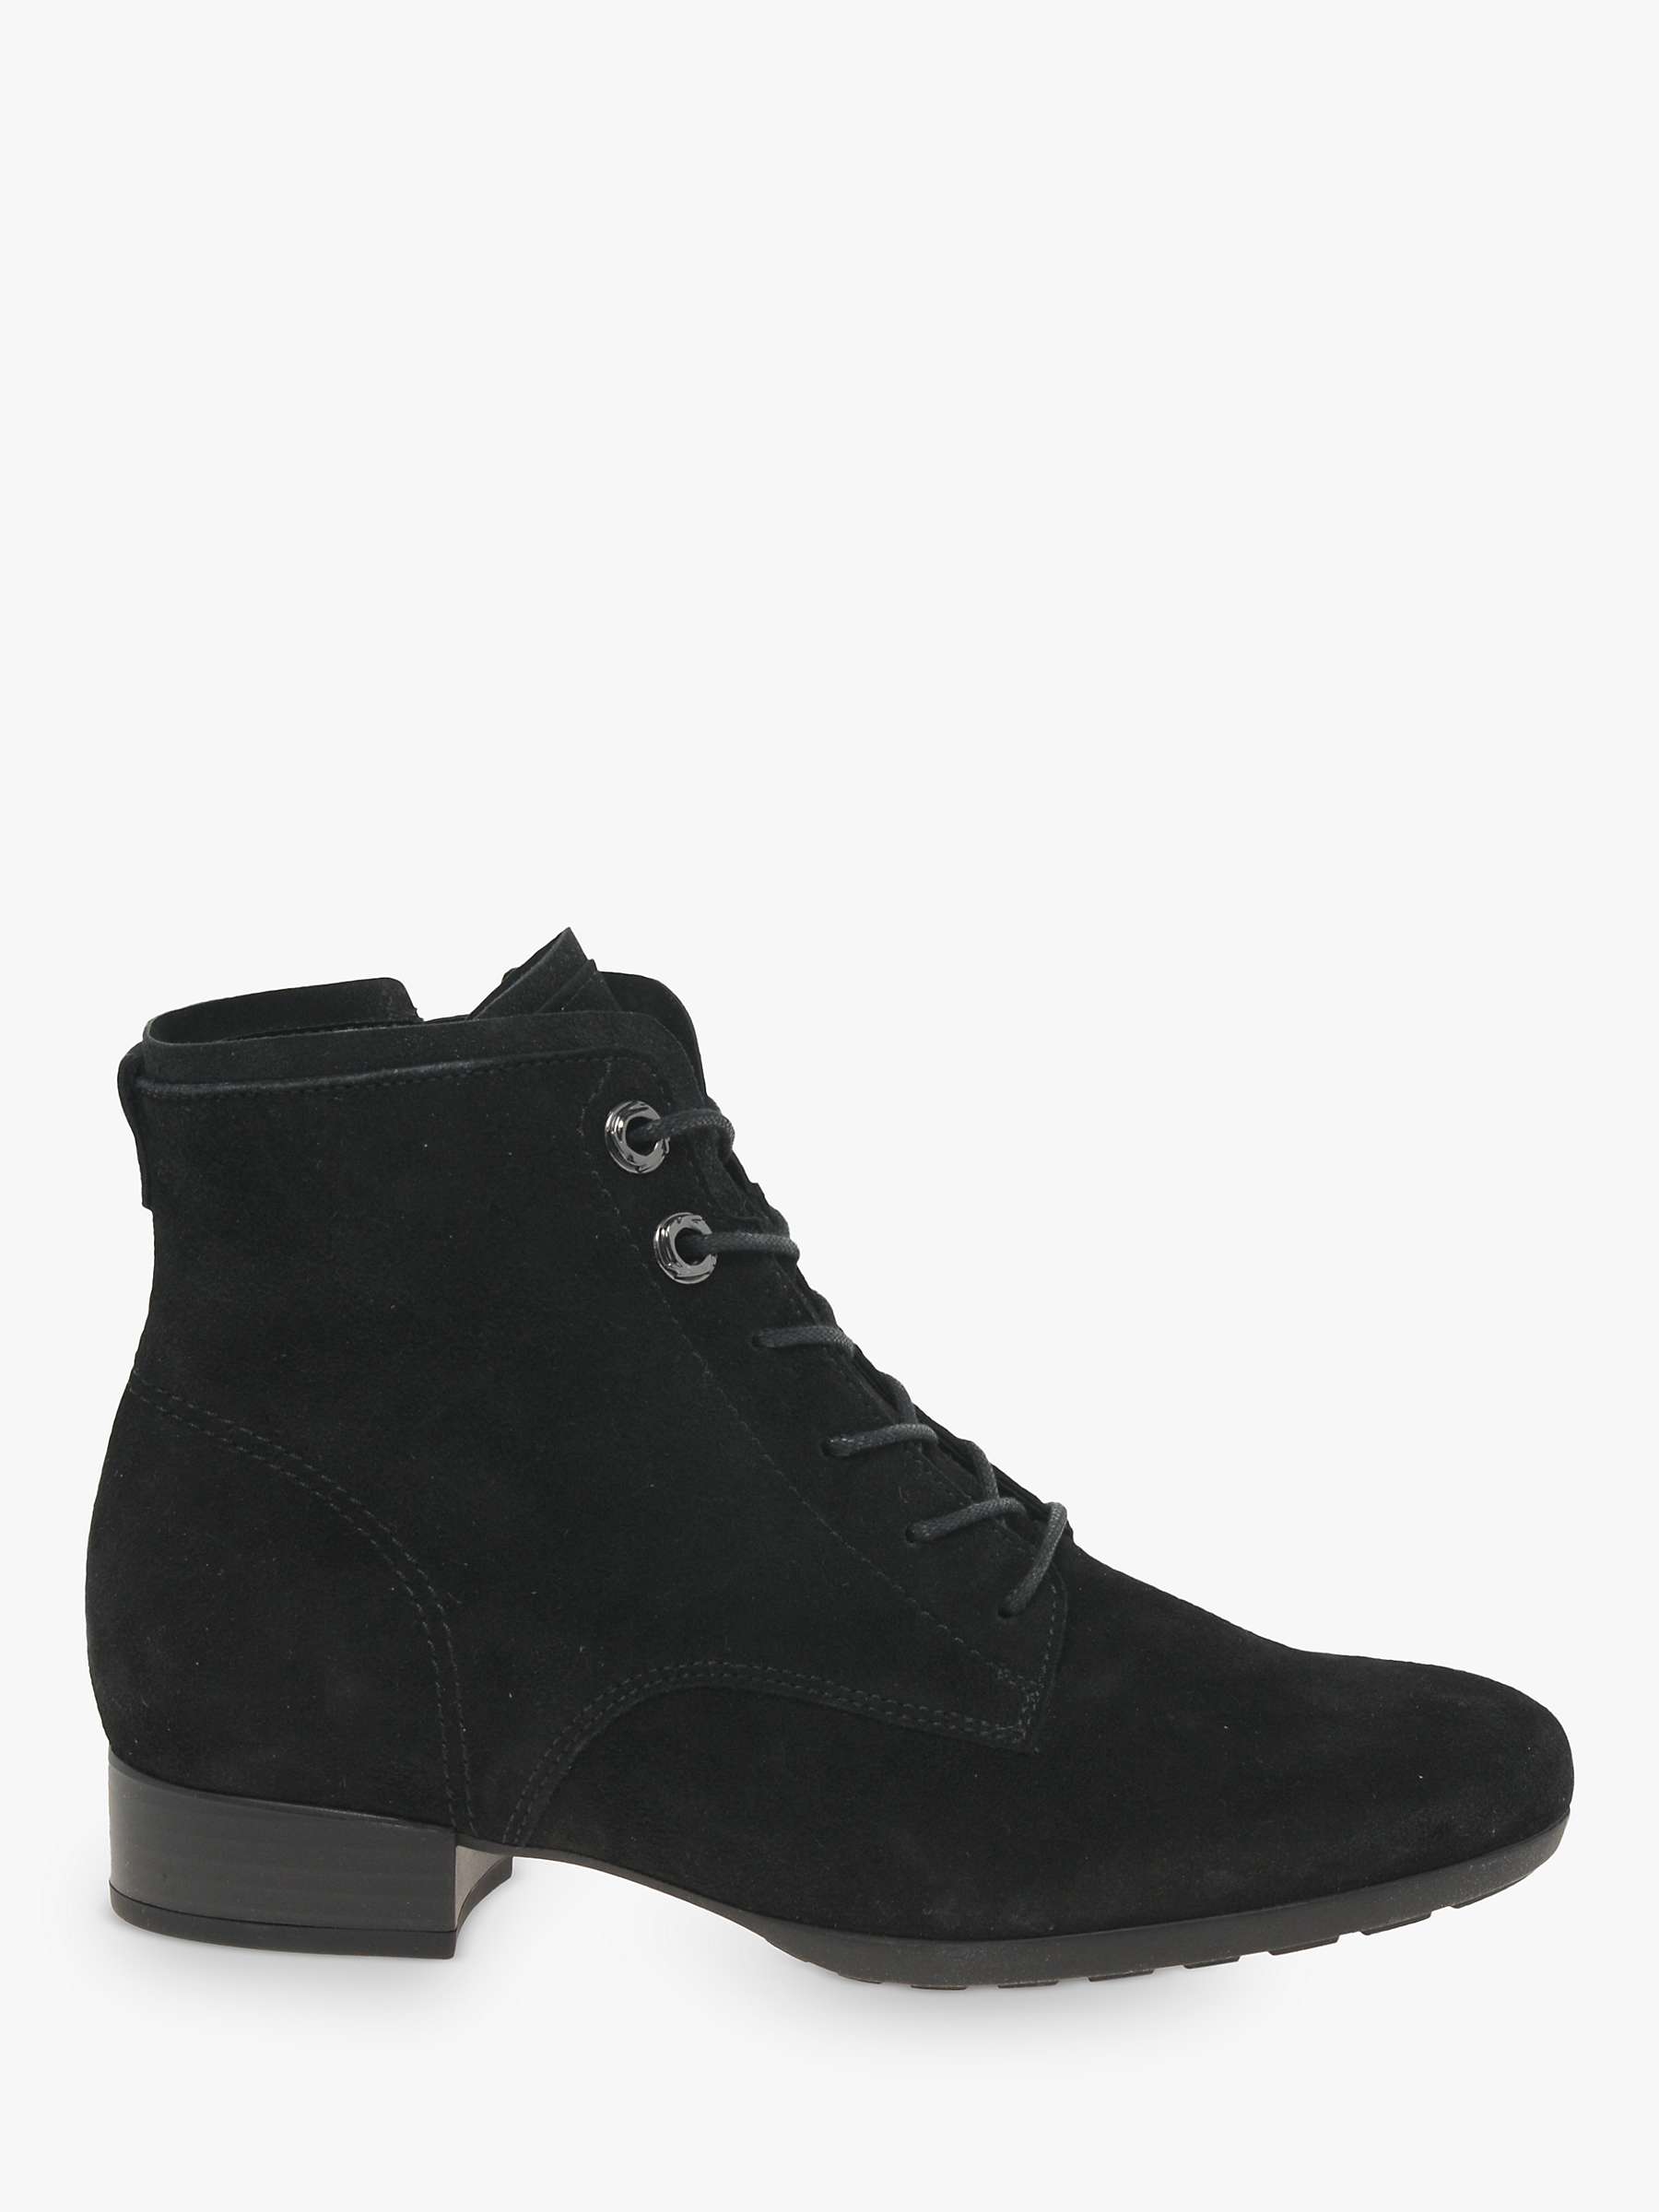 Gabor Boat Wide Fit Suede Lace Up Ankle Boots, Black at John Lewis ...